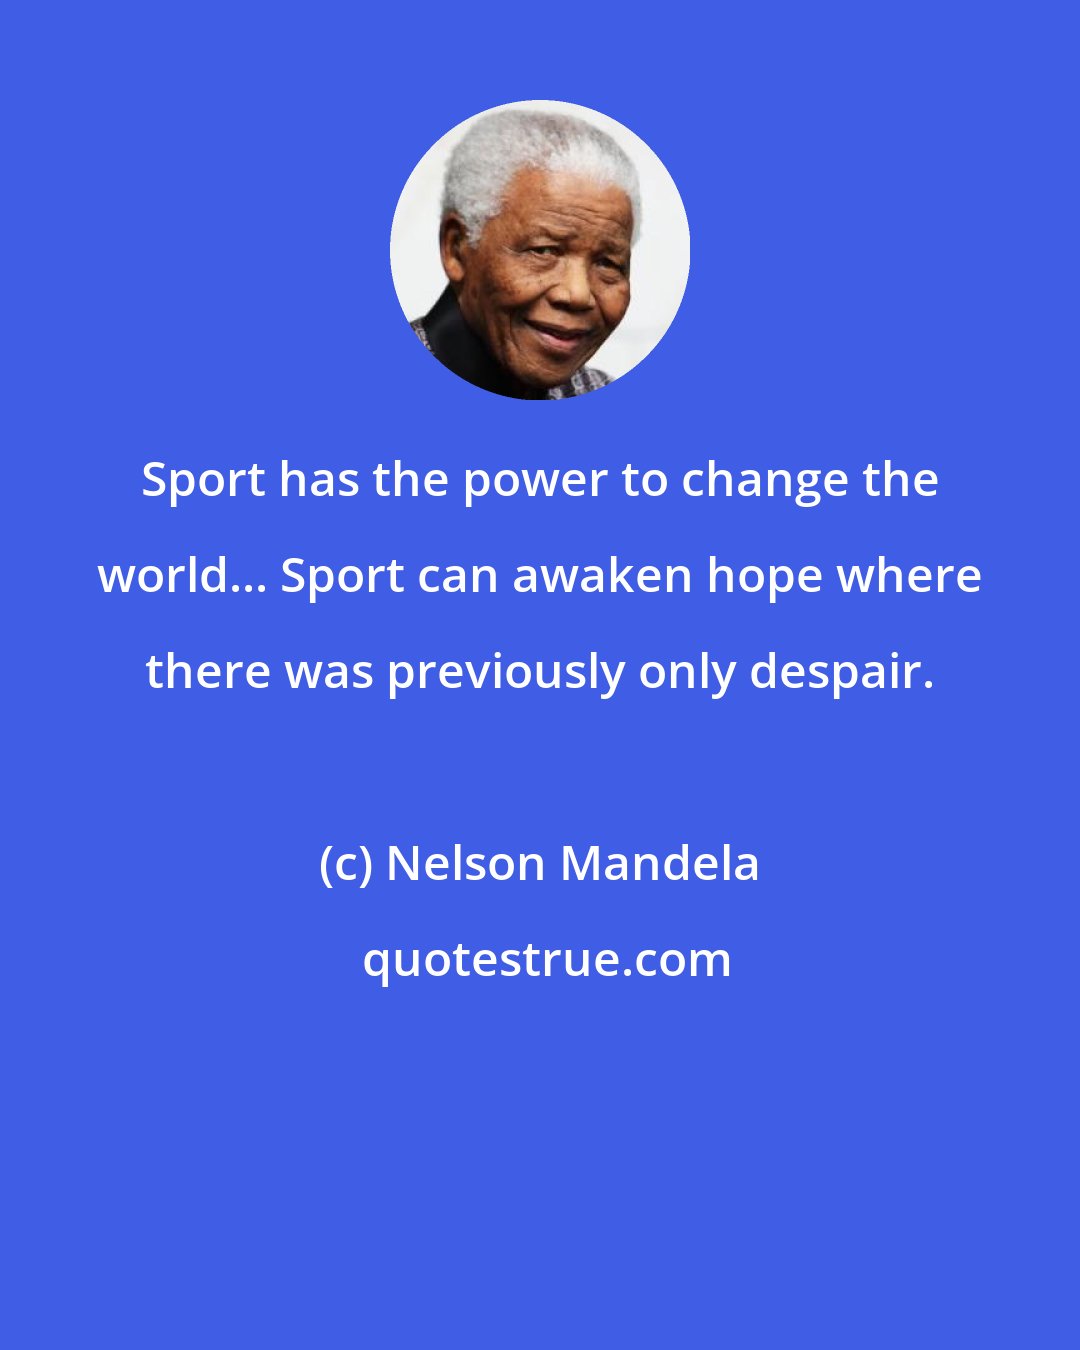 Nelson Mandela: Sport has the power to change the world... Sport can awaken hope where there was previously only despair.